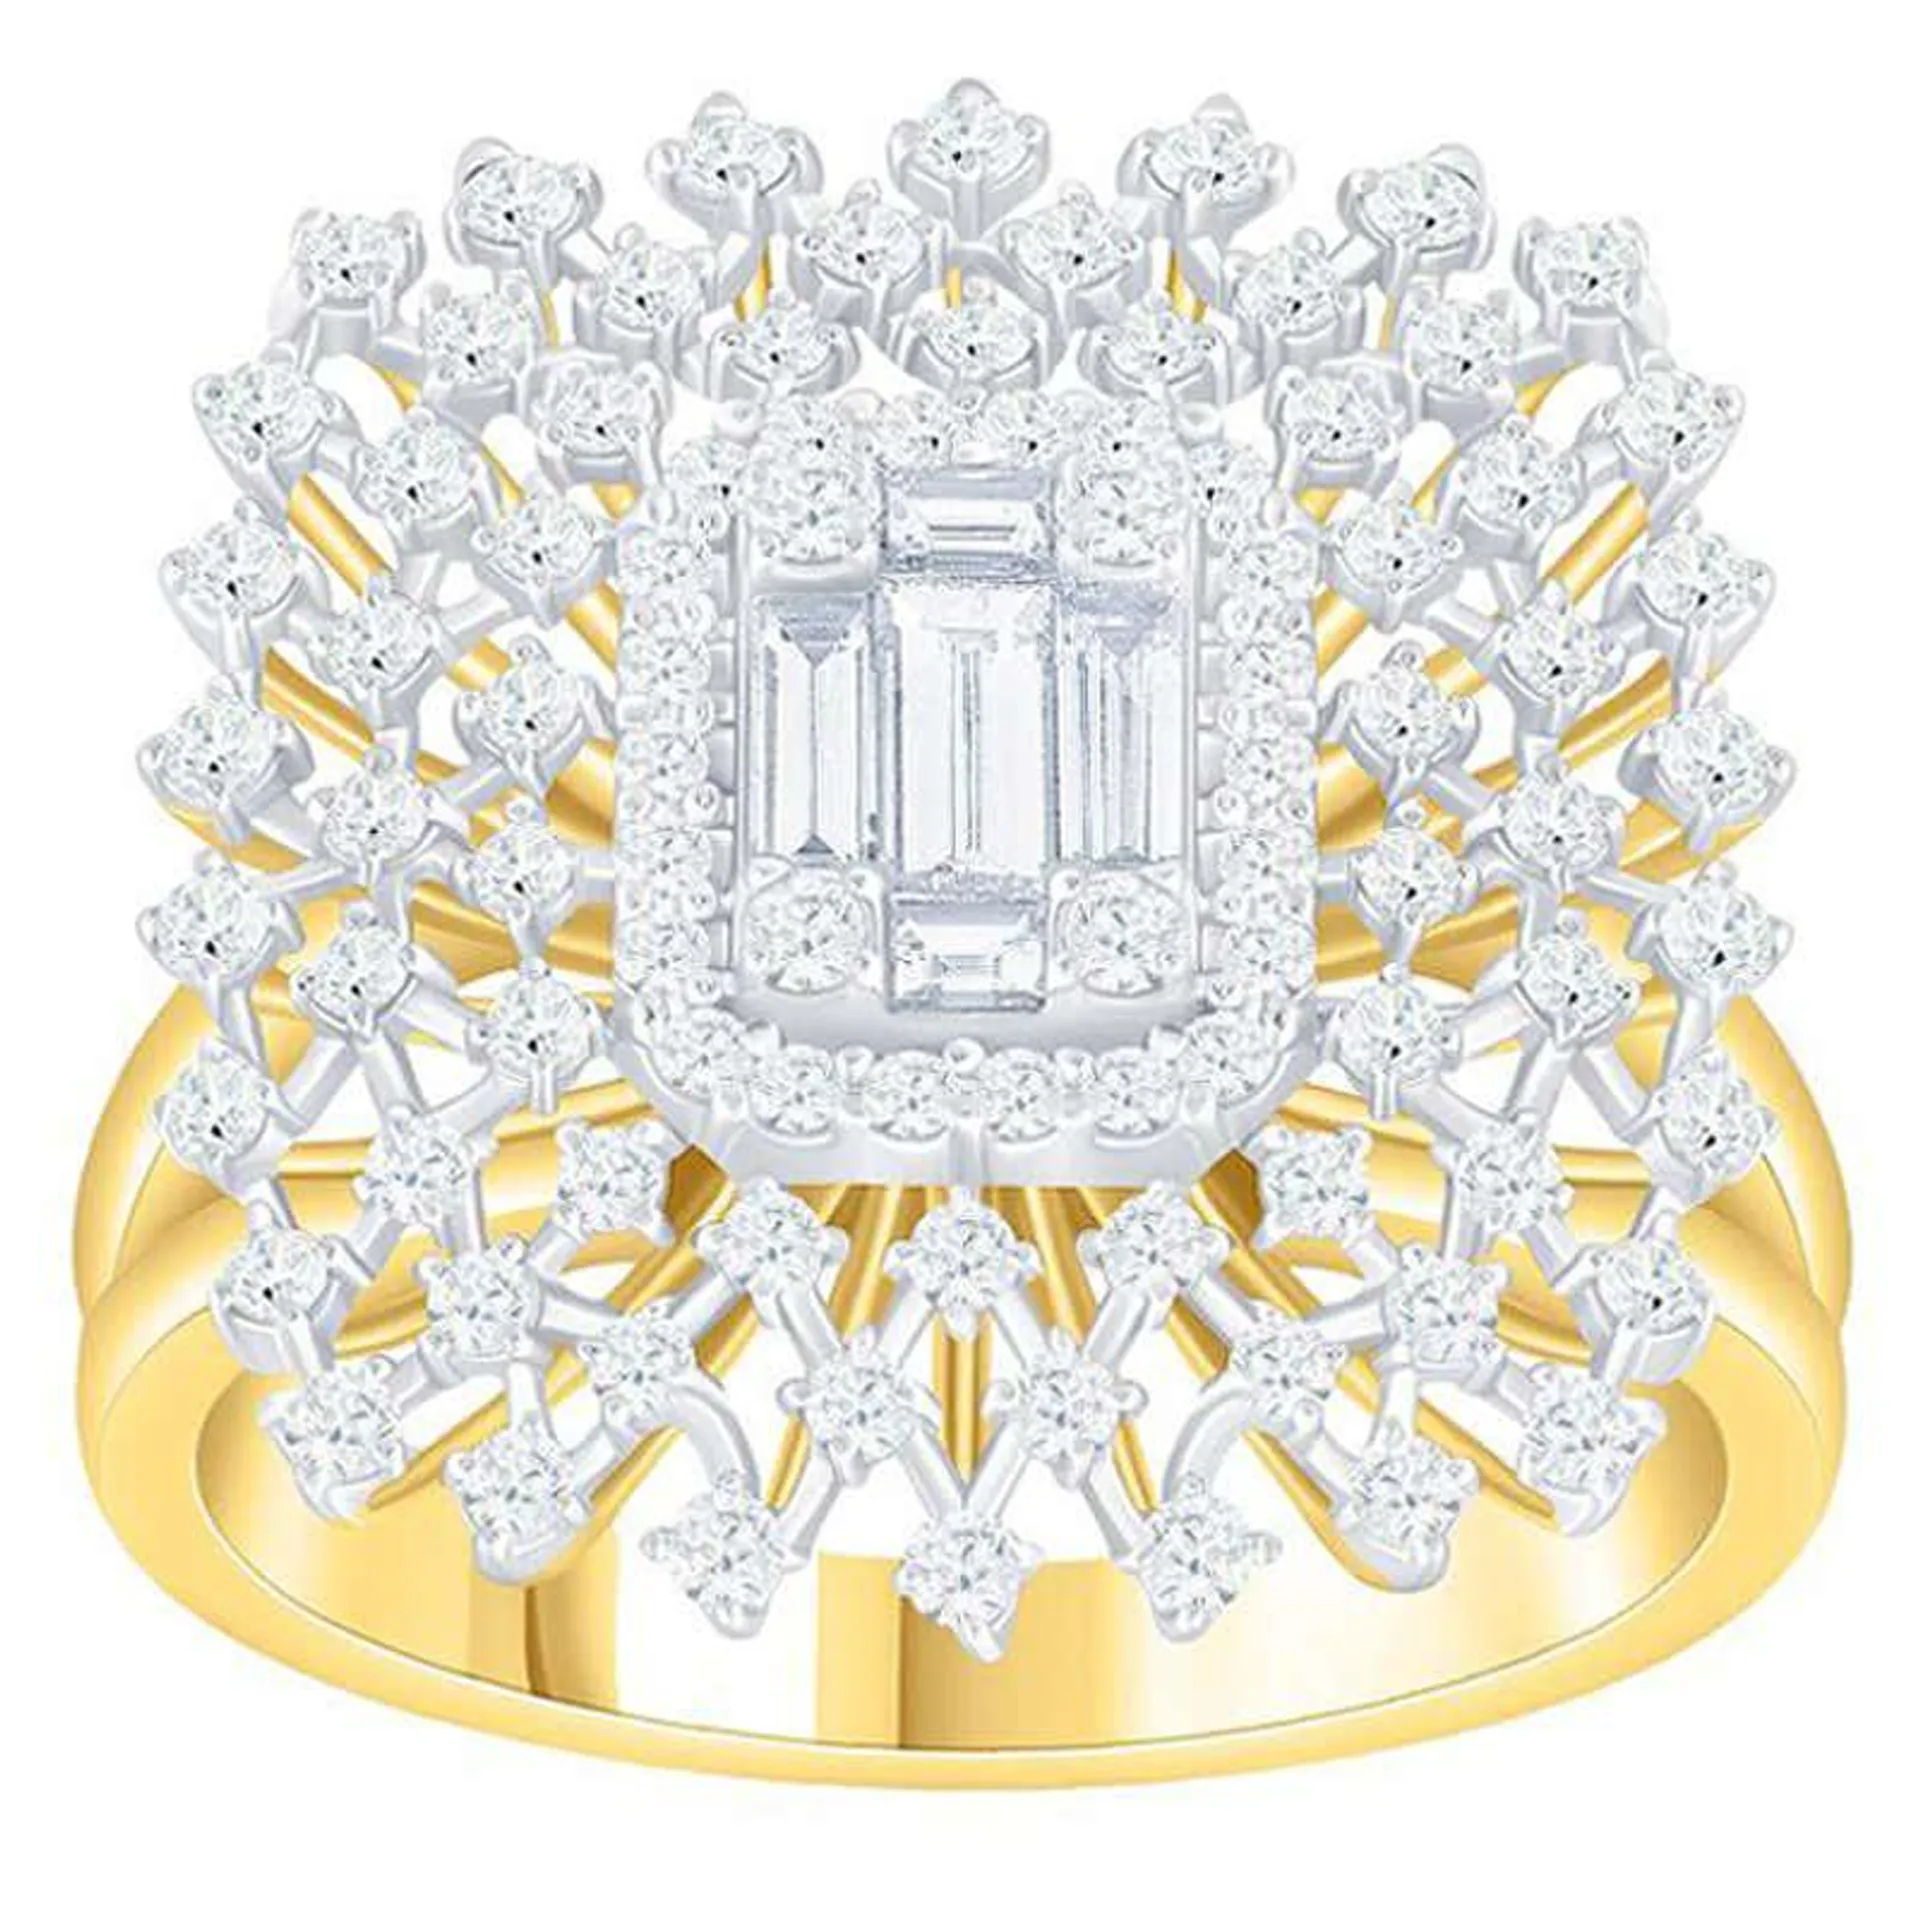 1.0ctw. Baguette & Round Diamond Cluster Ring in Solid 14k White Gold